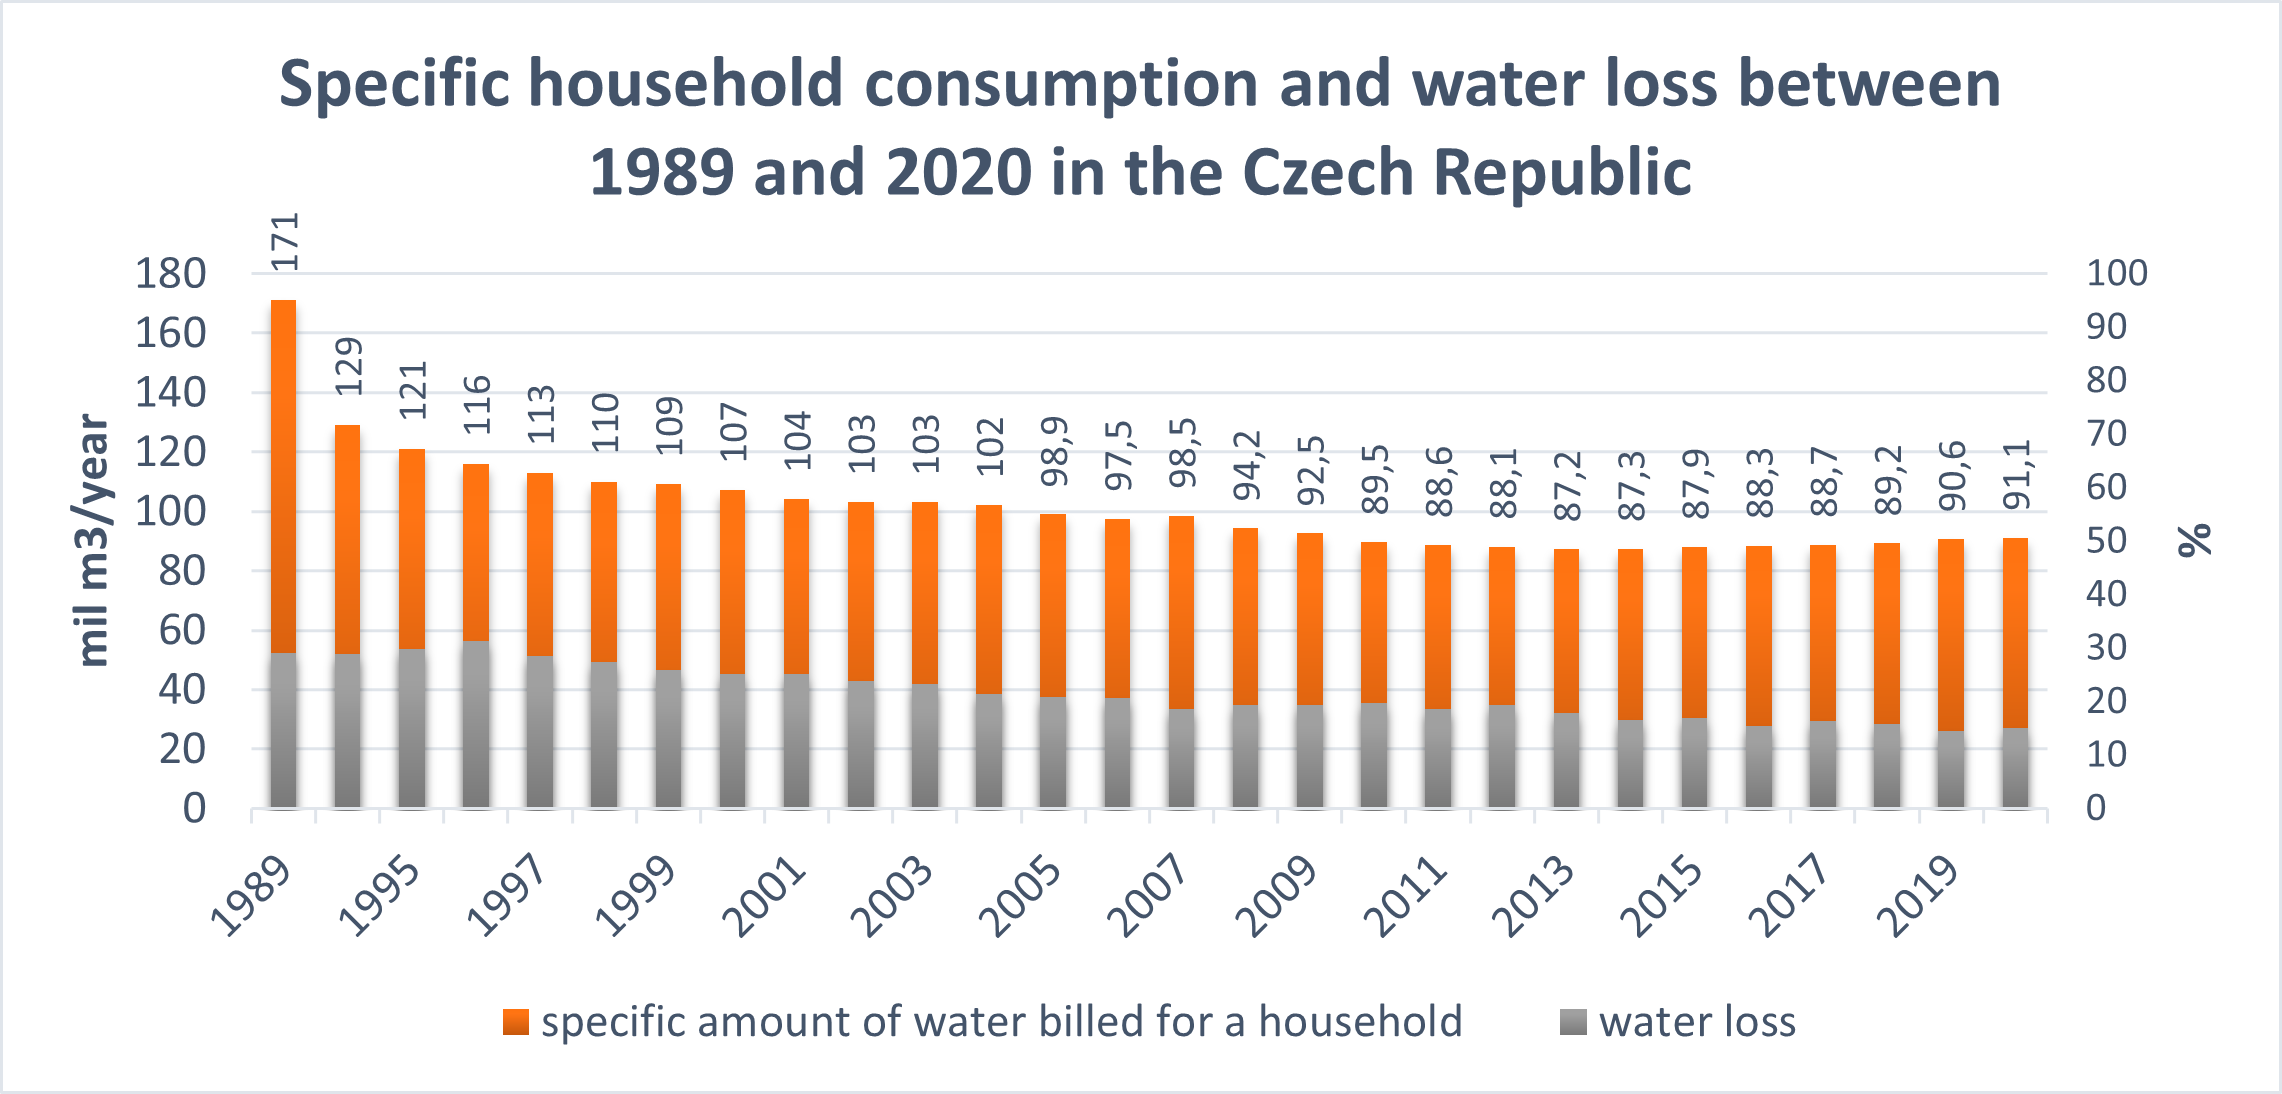 Specific household consumption and water loss between 1989 and 2020 in the Czech Republic